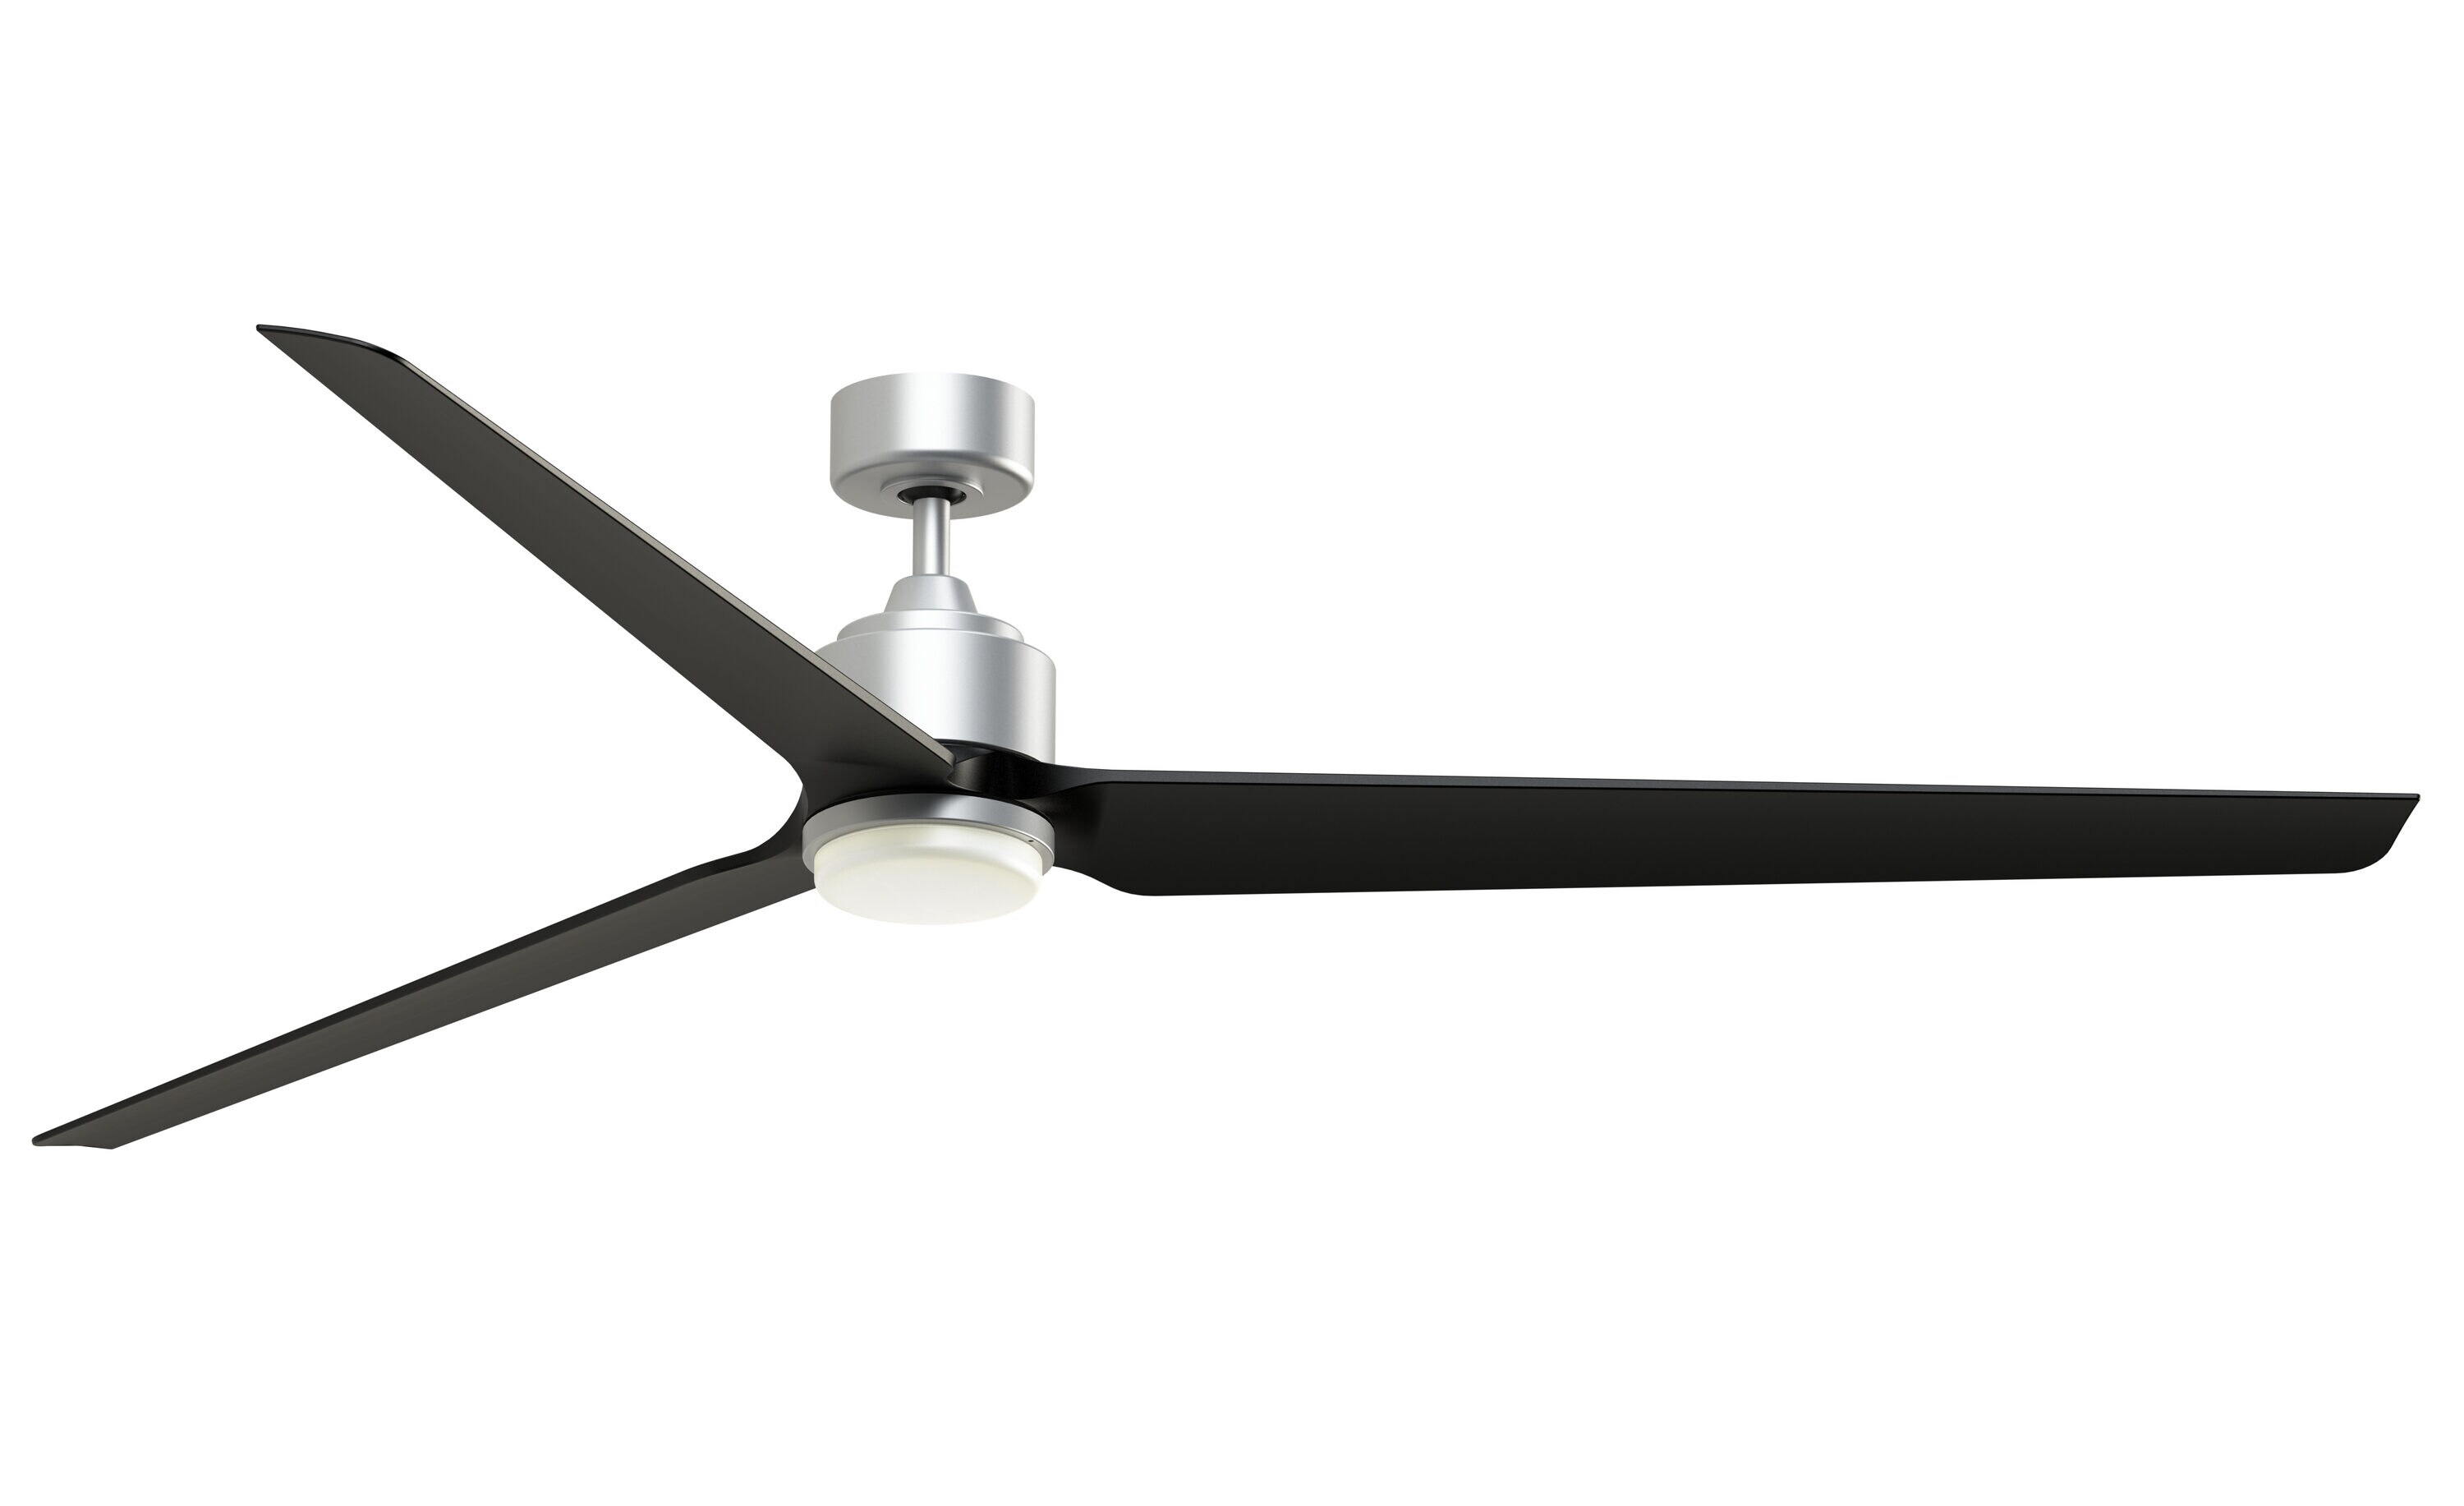 TriAire Custom 84-in Silver Color-changing LED Indoor/Outdoor Smart Propeller Ceiling Fan with Light Remote (3-Blade) | - Fanimation FPD8515SLW-84BLW-LK